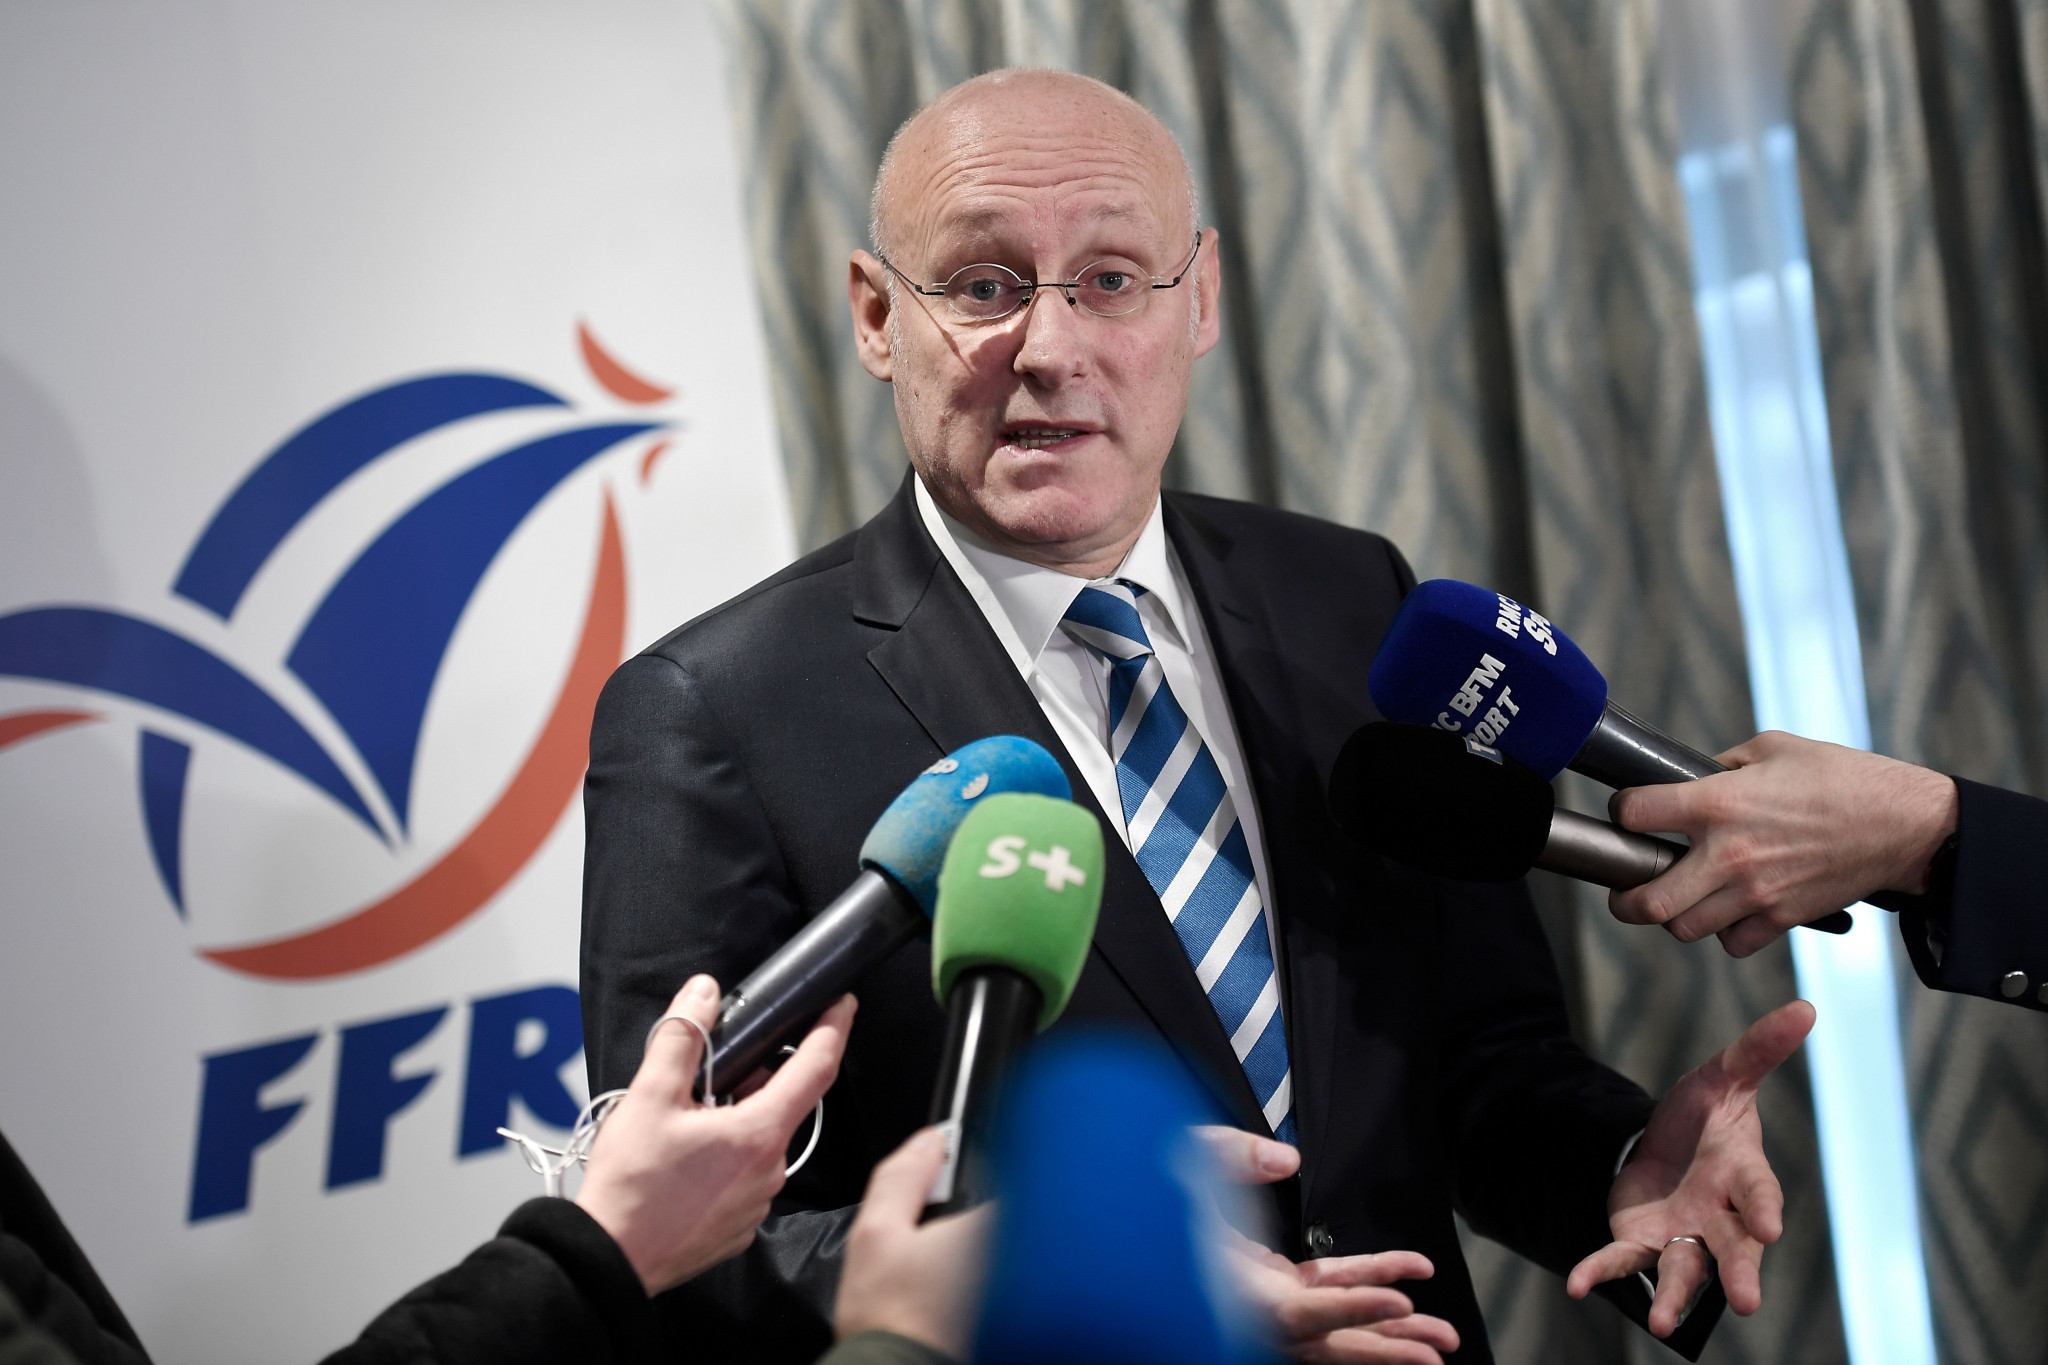 The FFR is looking for a new President after Bernard Laporte resigned after being convicted of corruption charges ©Getty Images